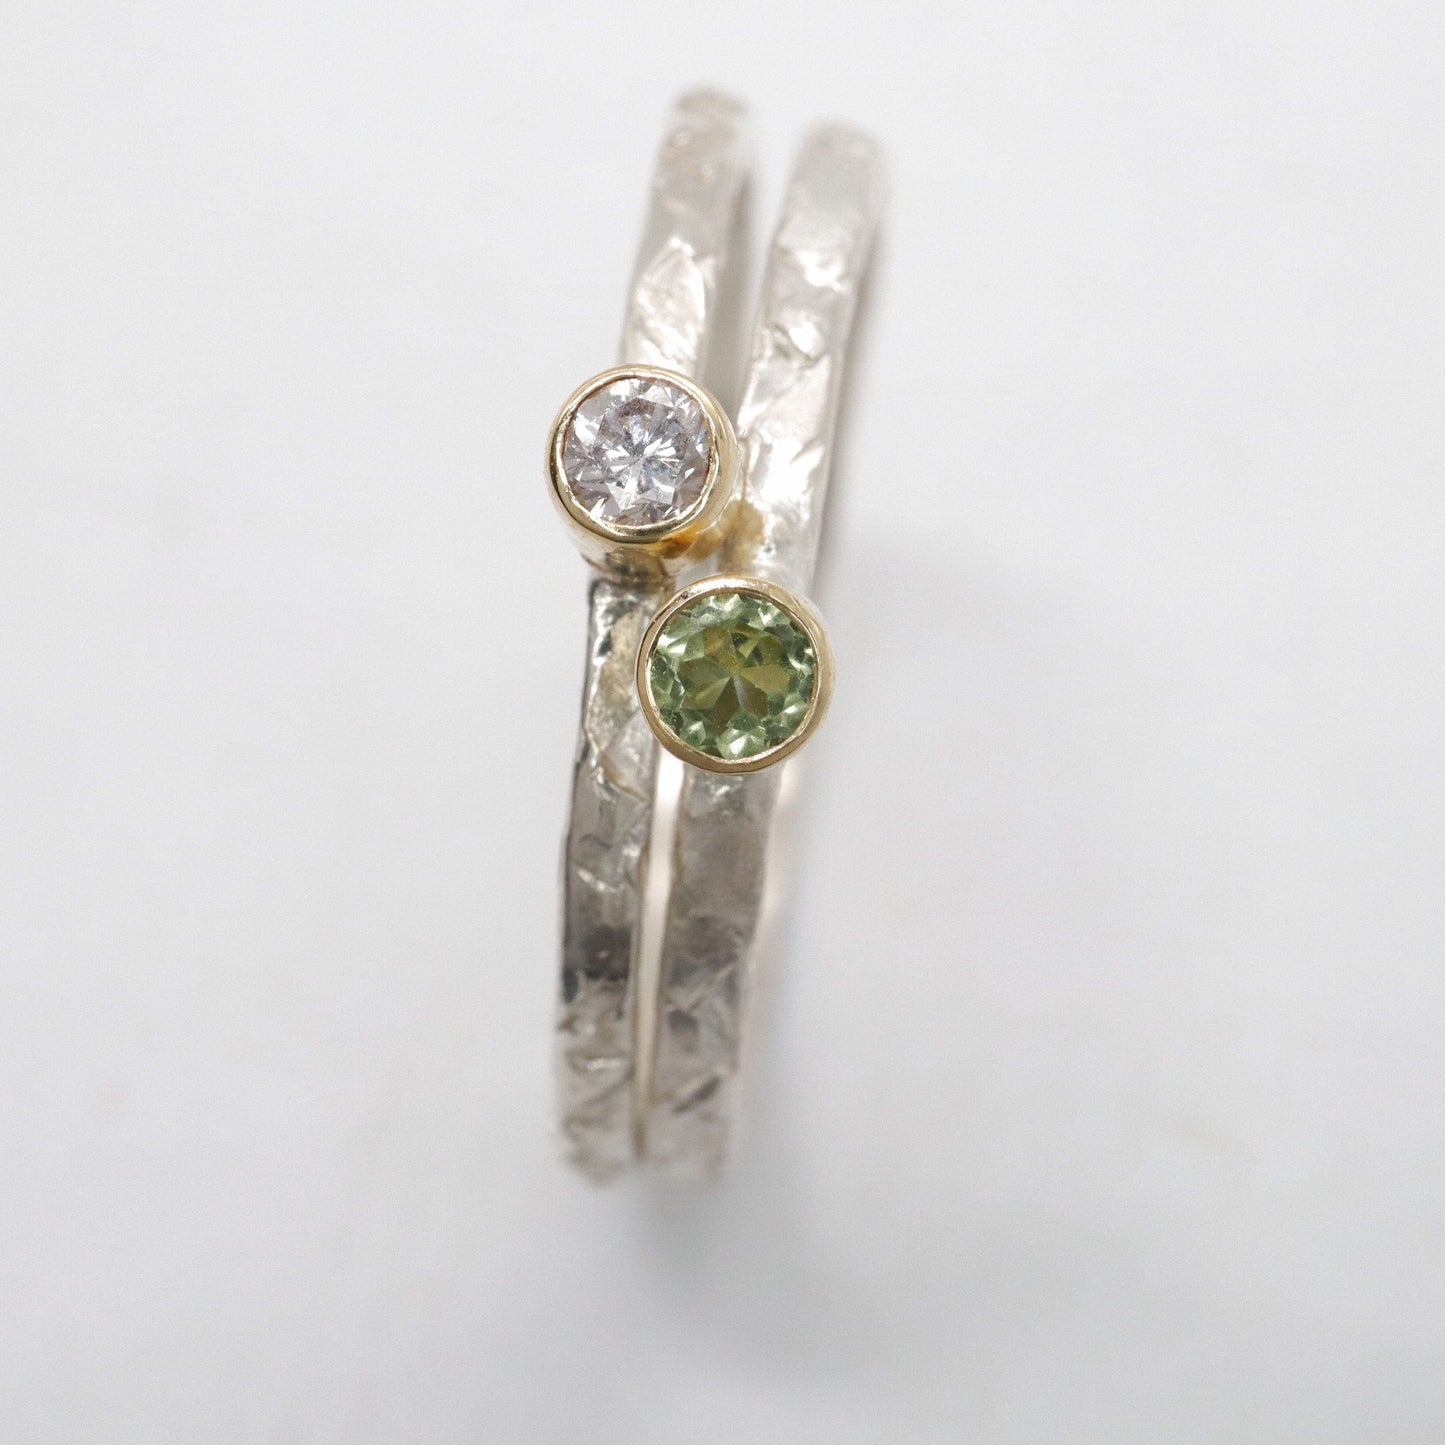 Stacking two ring set with peridot and diamond, Striding Edge design in 18ct yellow gold and silver.